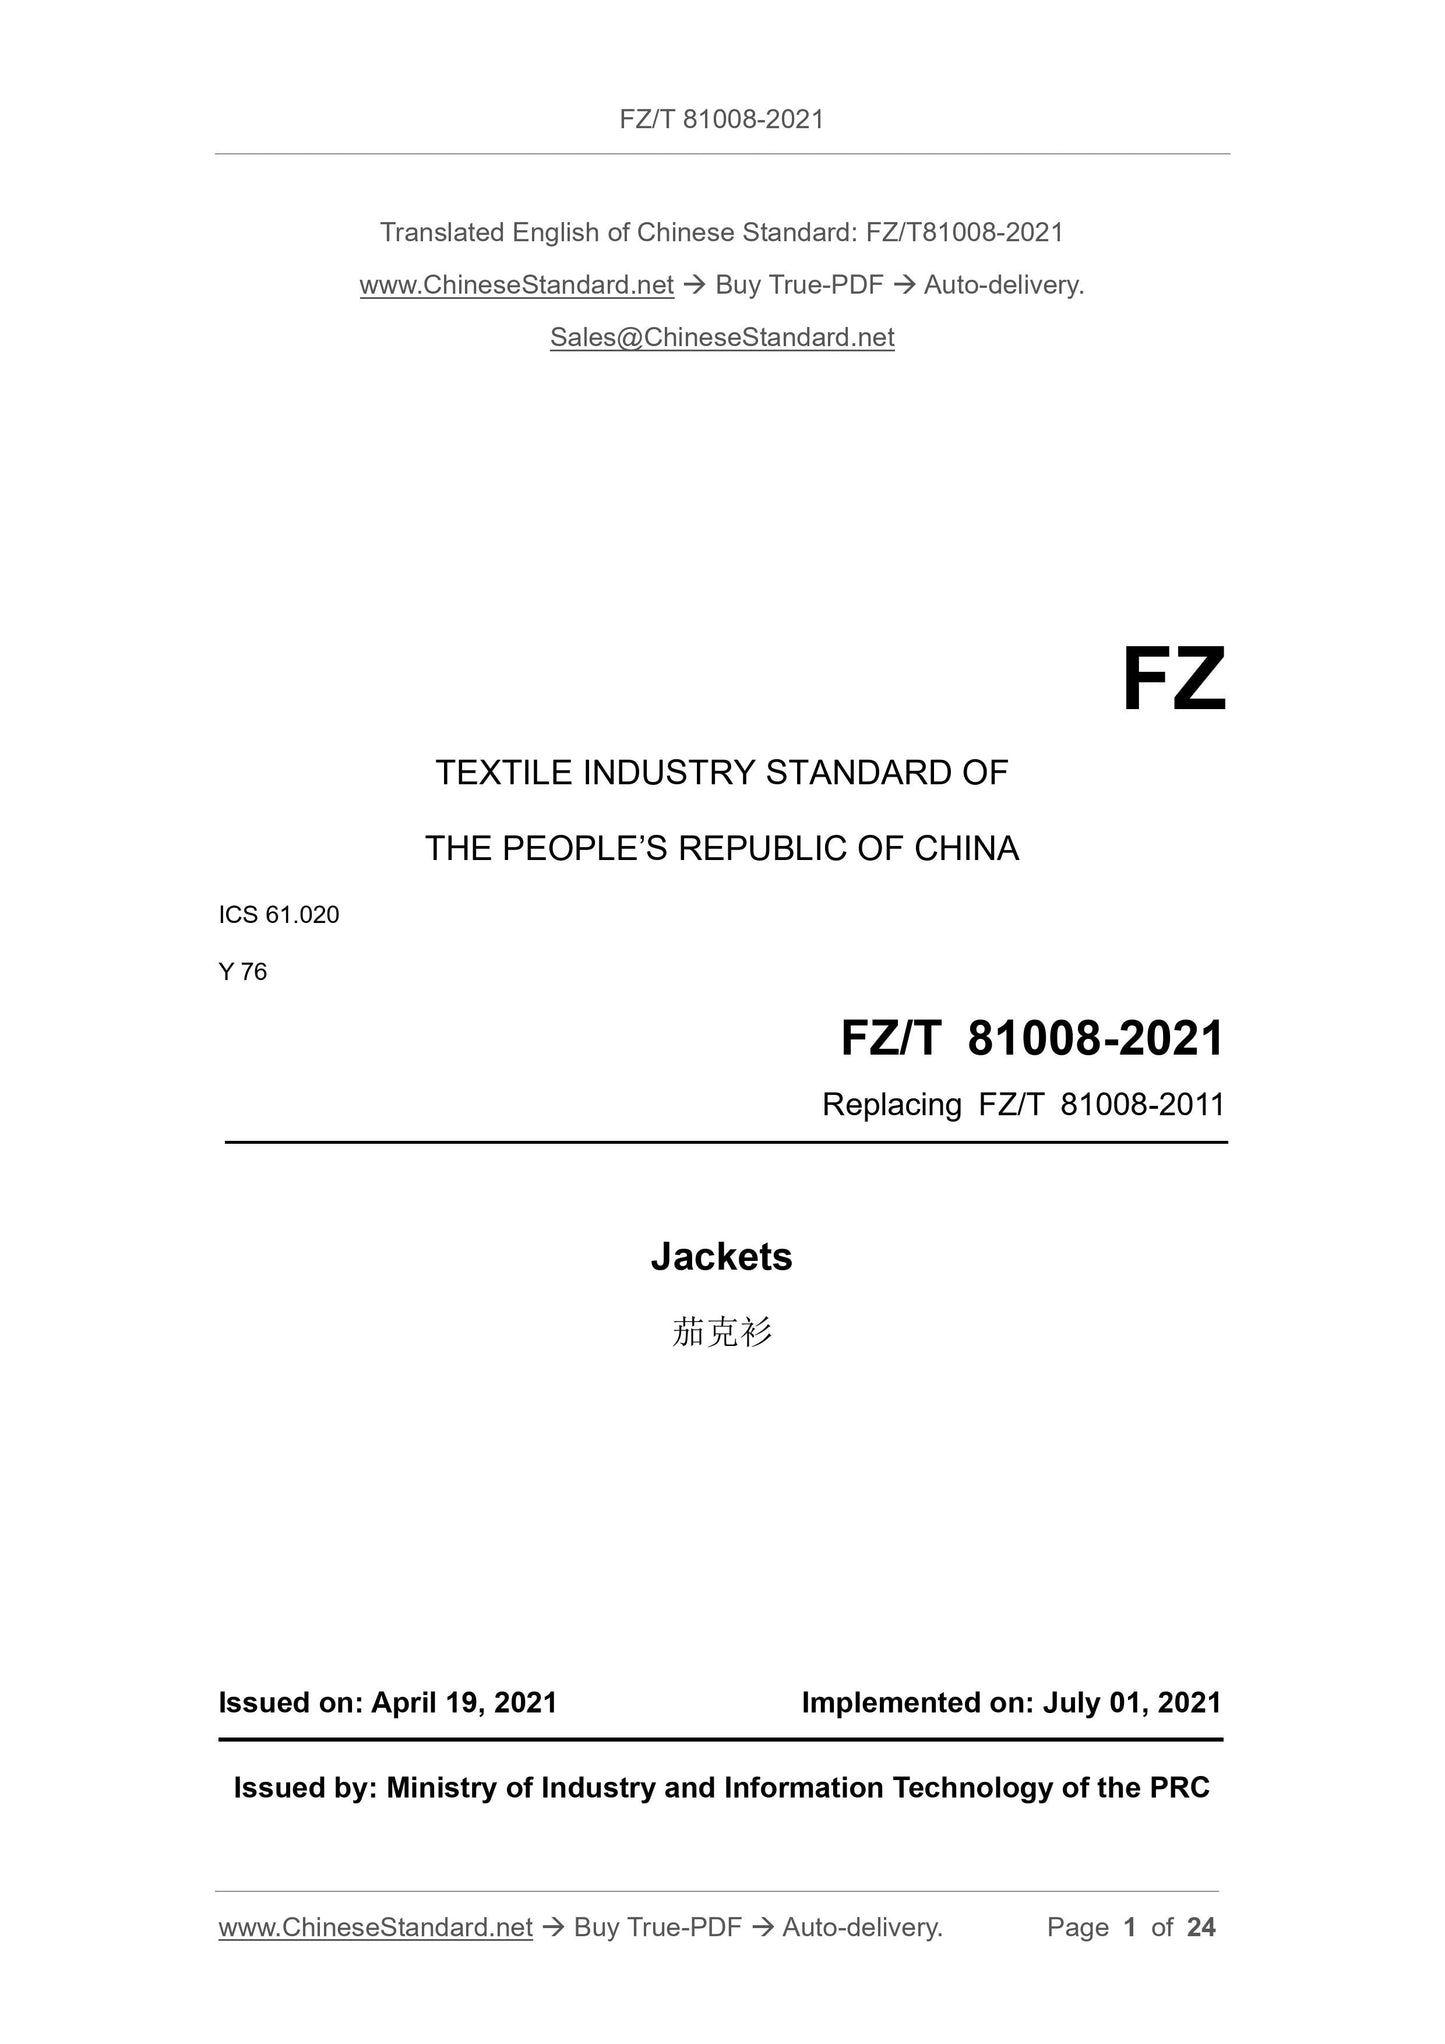 FZ/T 81008-2021 Page 1